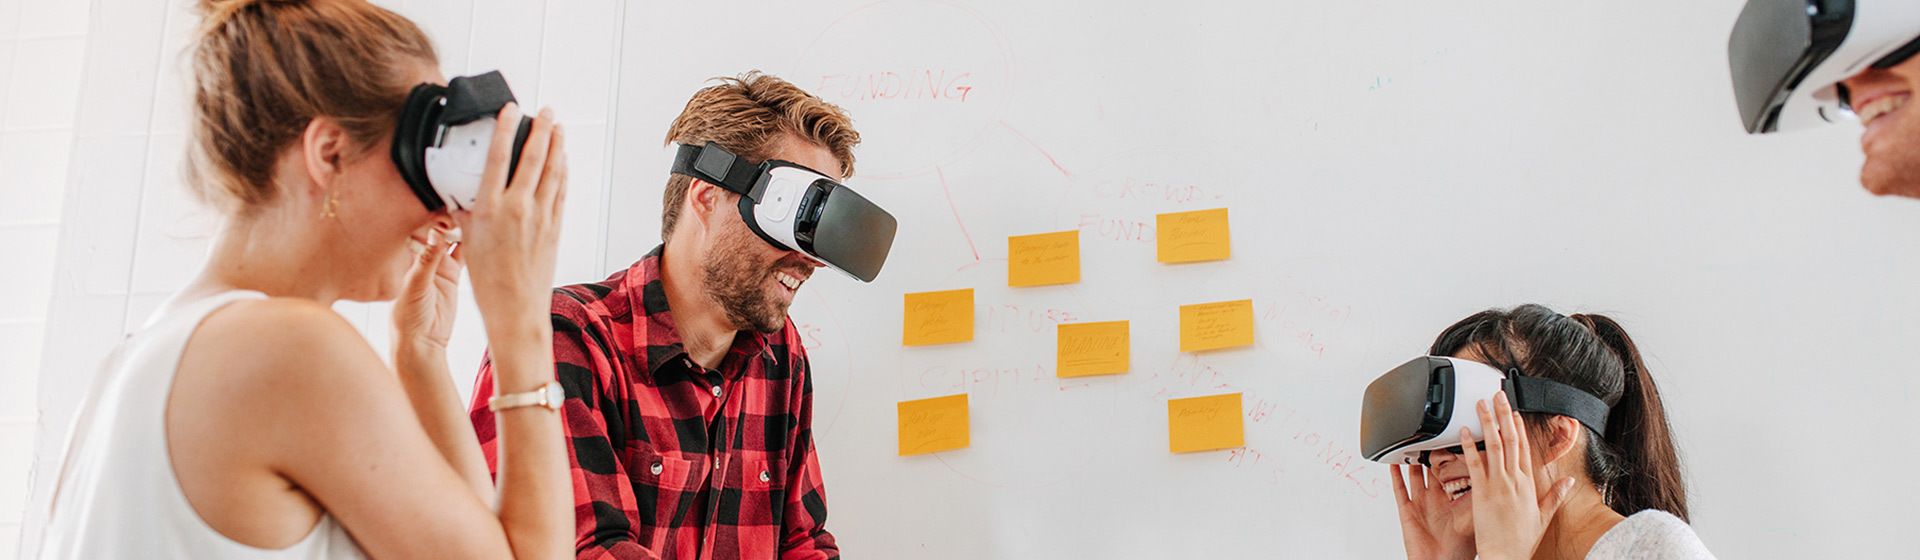 Creating Interactive eLearning Using VR And 360° Assets With Adobe Captivate (2019 Release)